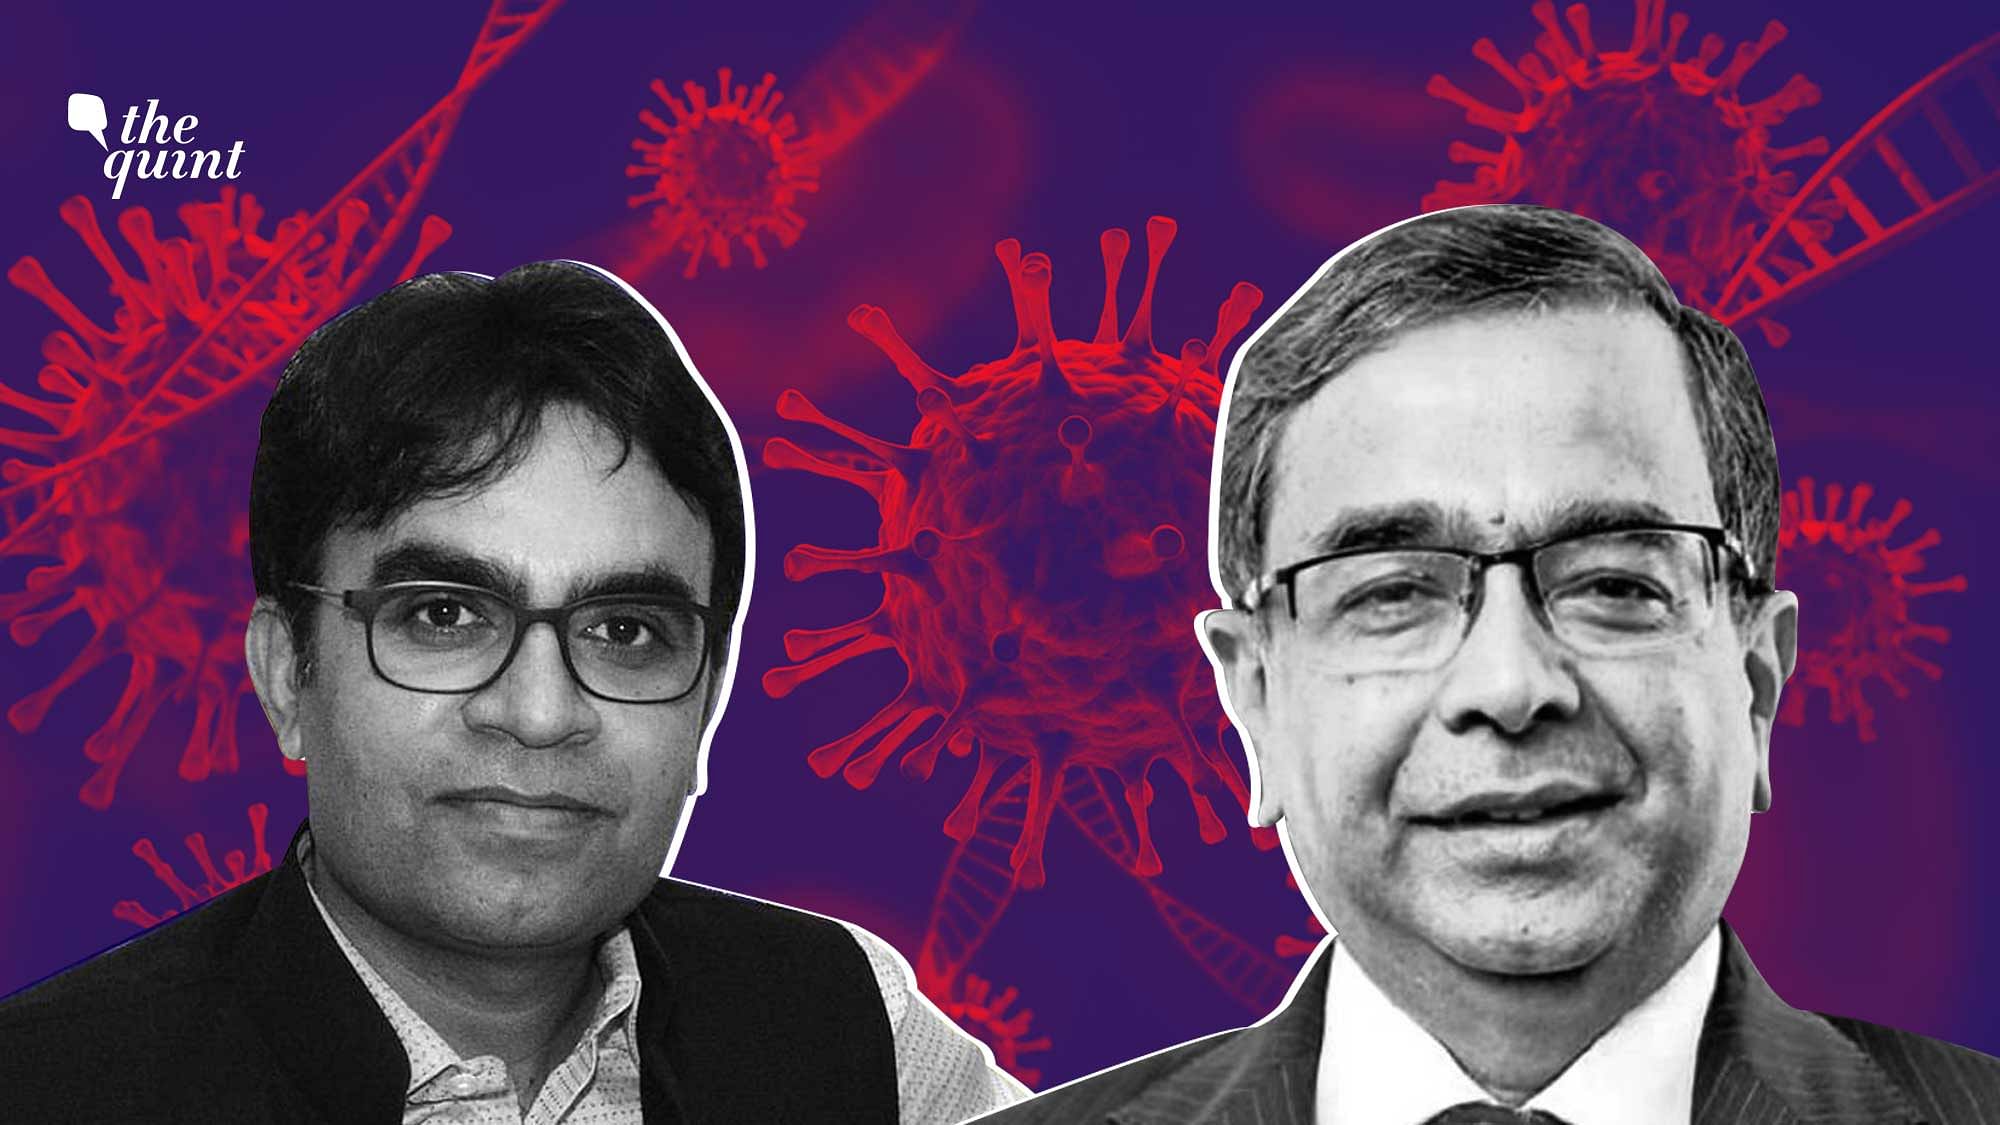 <div class="paragraphs"><p>Left to right: Chandrakant Lahariya, epidemiologist and health systems expert and Dr Srinath Reddy, President of Public Health Foundation of India</p></div>